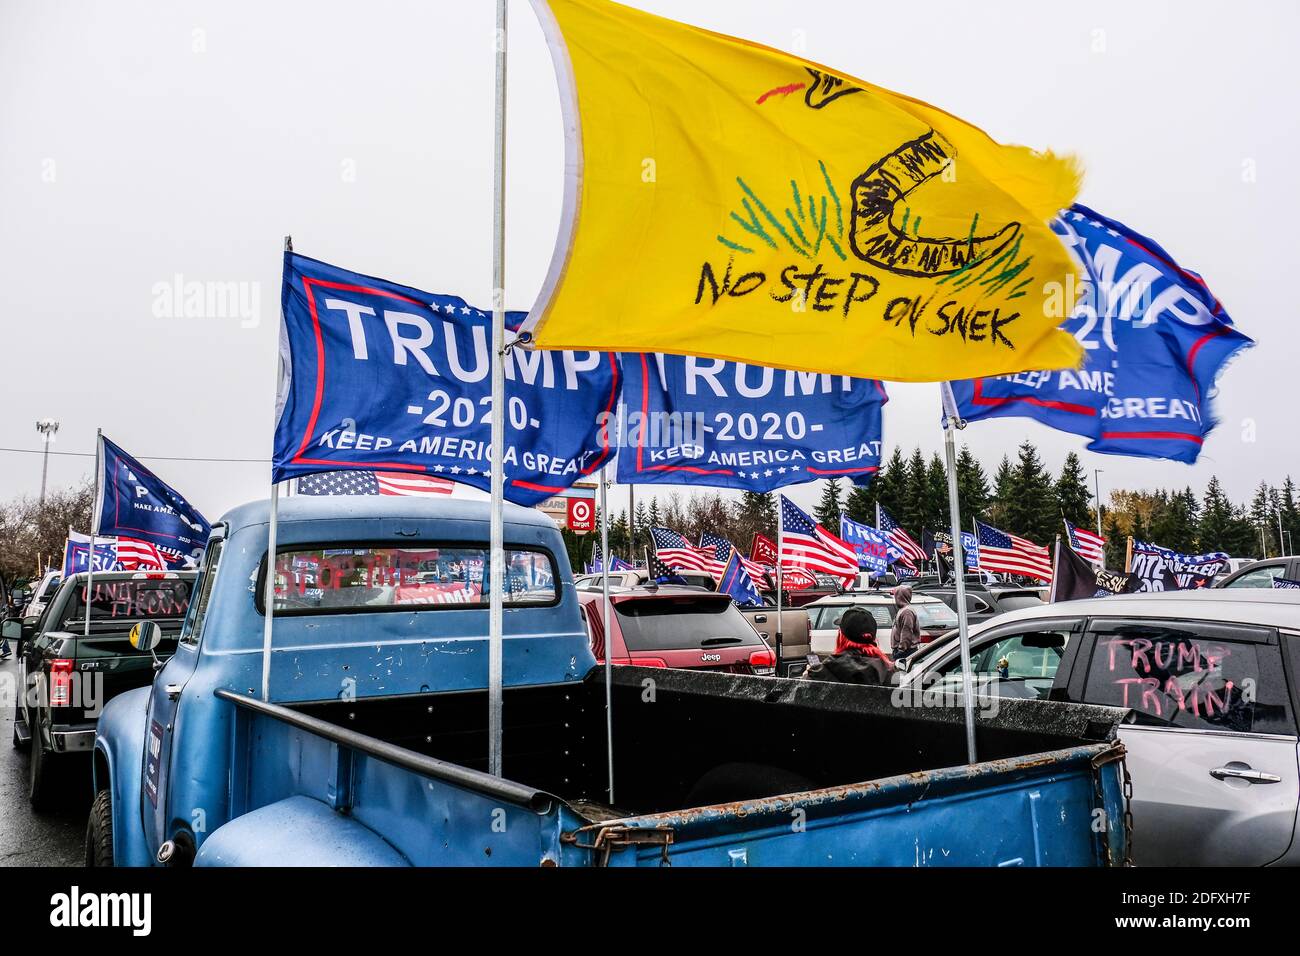 No Step On Snek and Trump flags on back of pickup truck at a Trump Rally Stock Photo